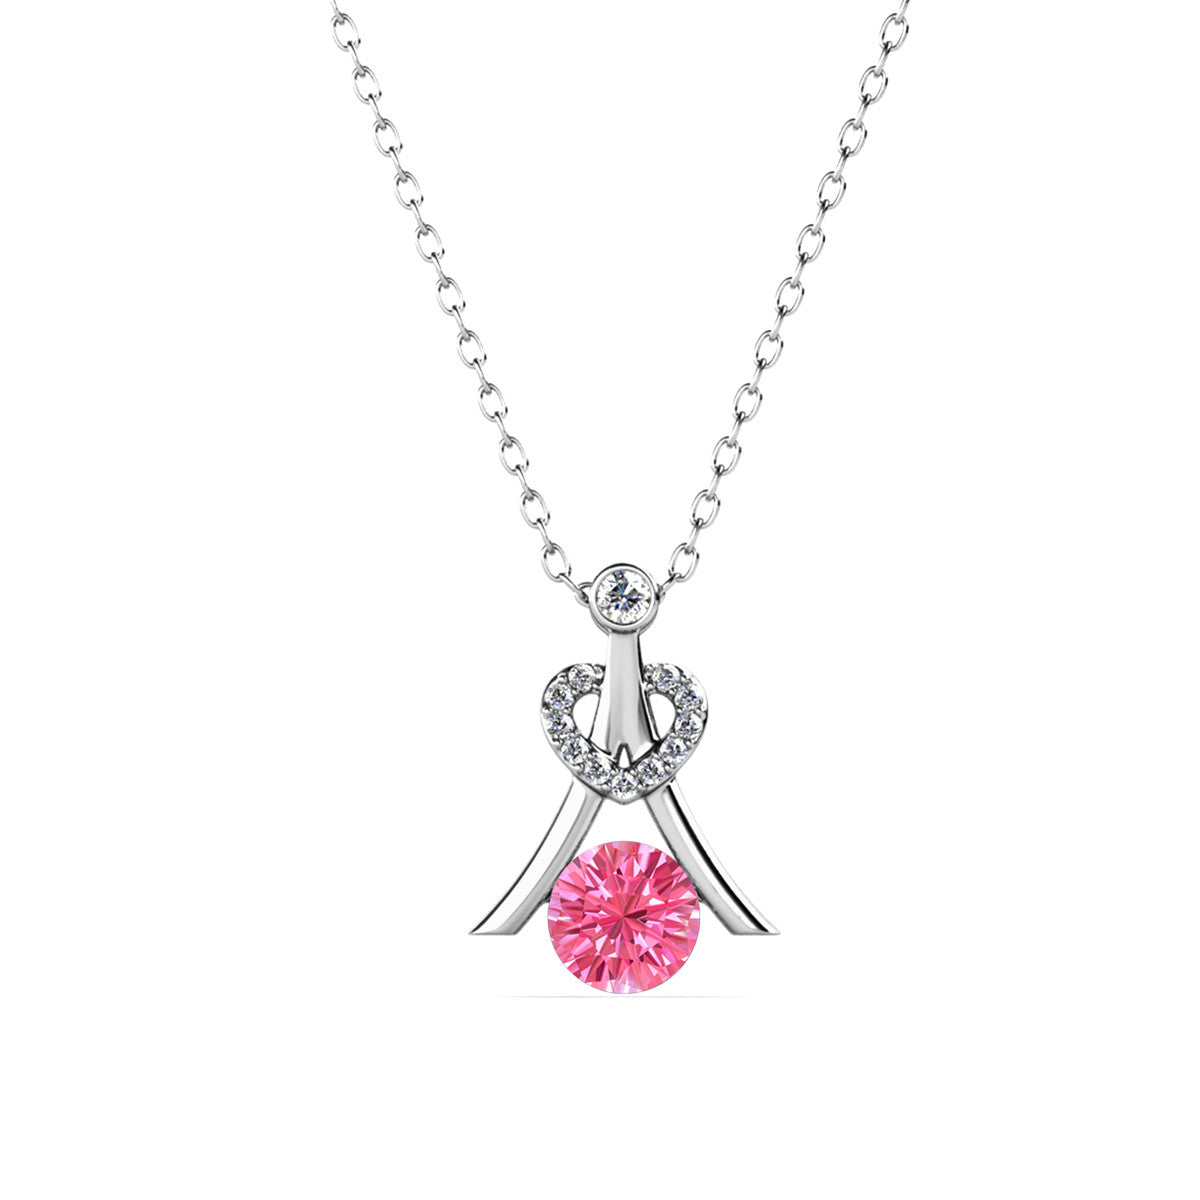 Serenity October Birthstone Pink Tourmaline Necklace, 18k White Gold Plated Silver Necklace with Round Cut Crystals